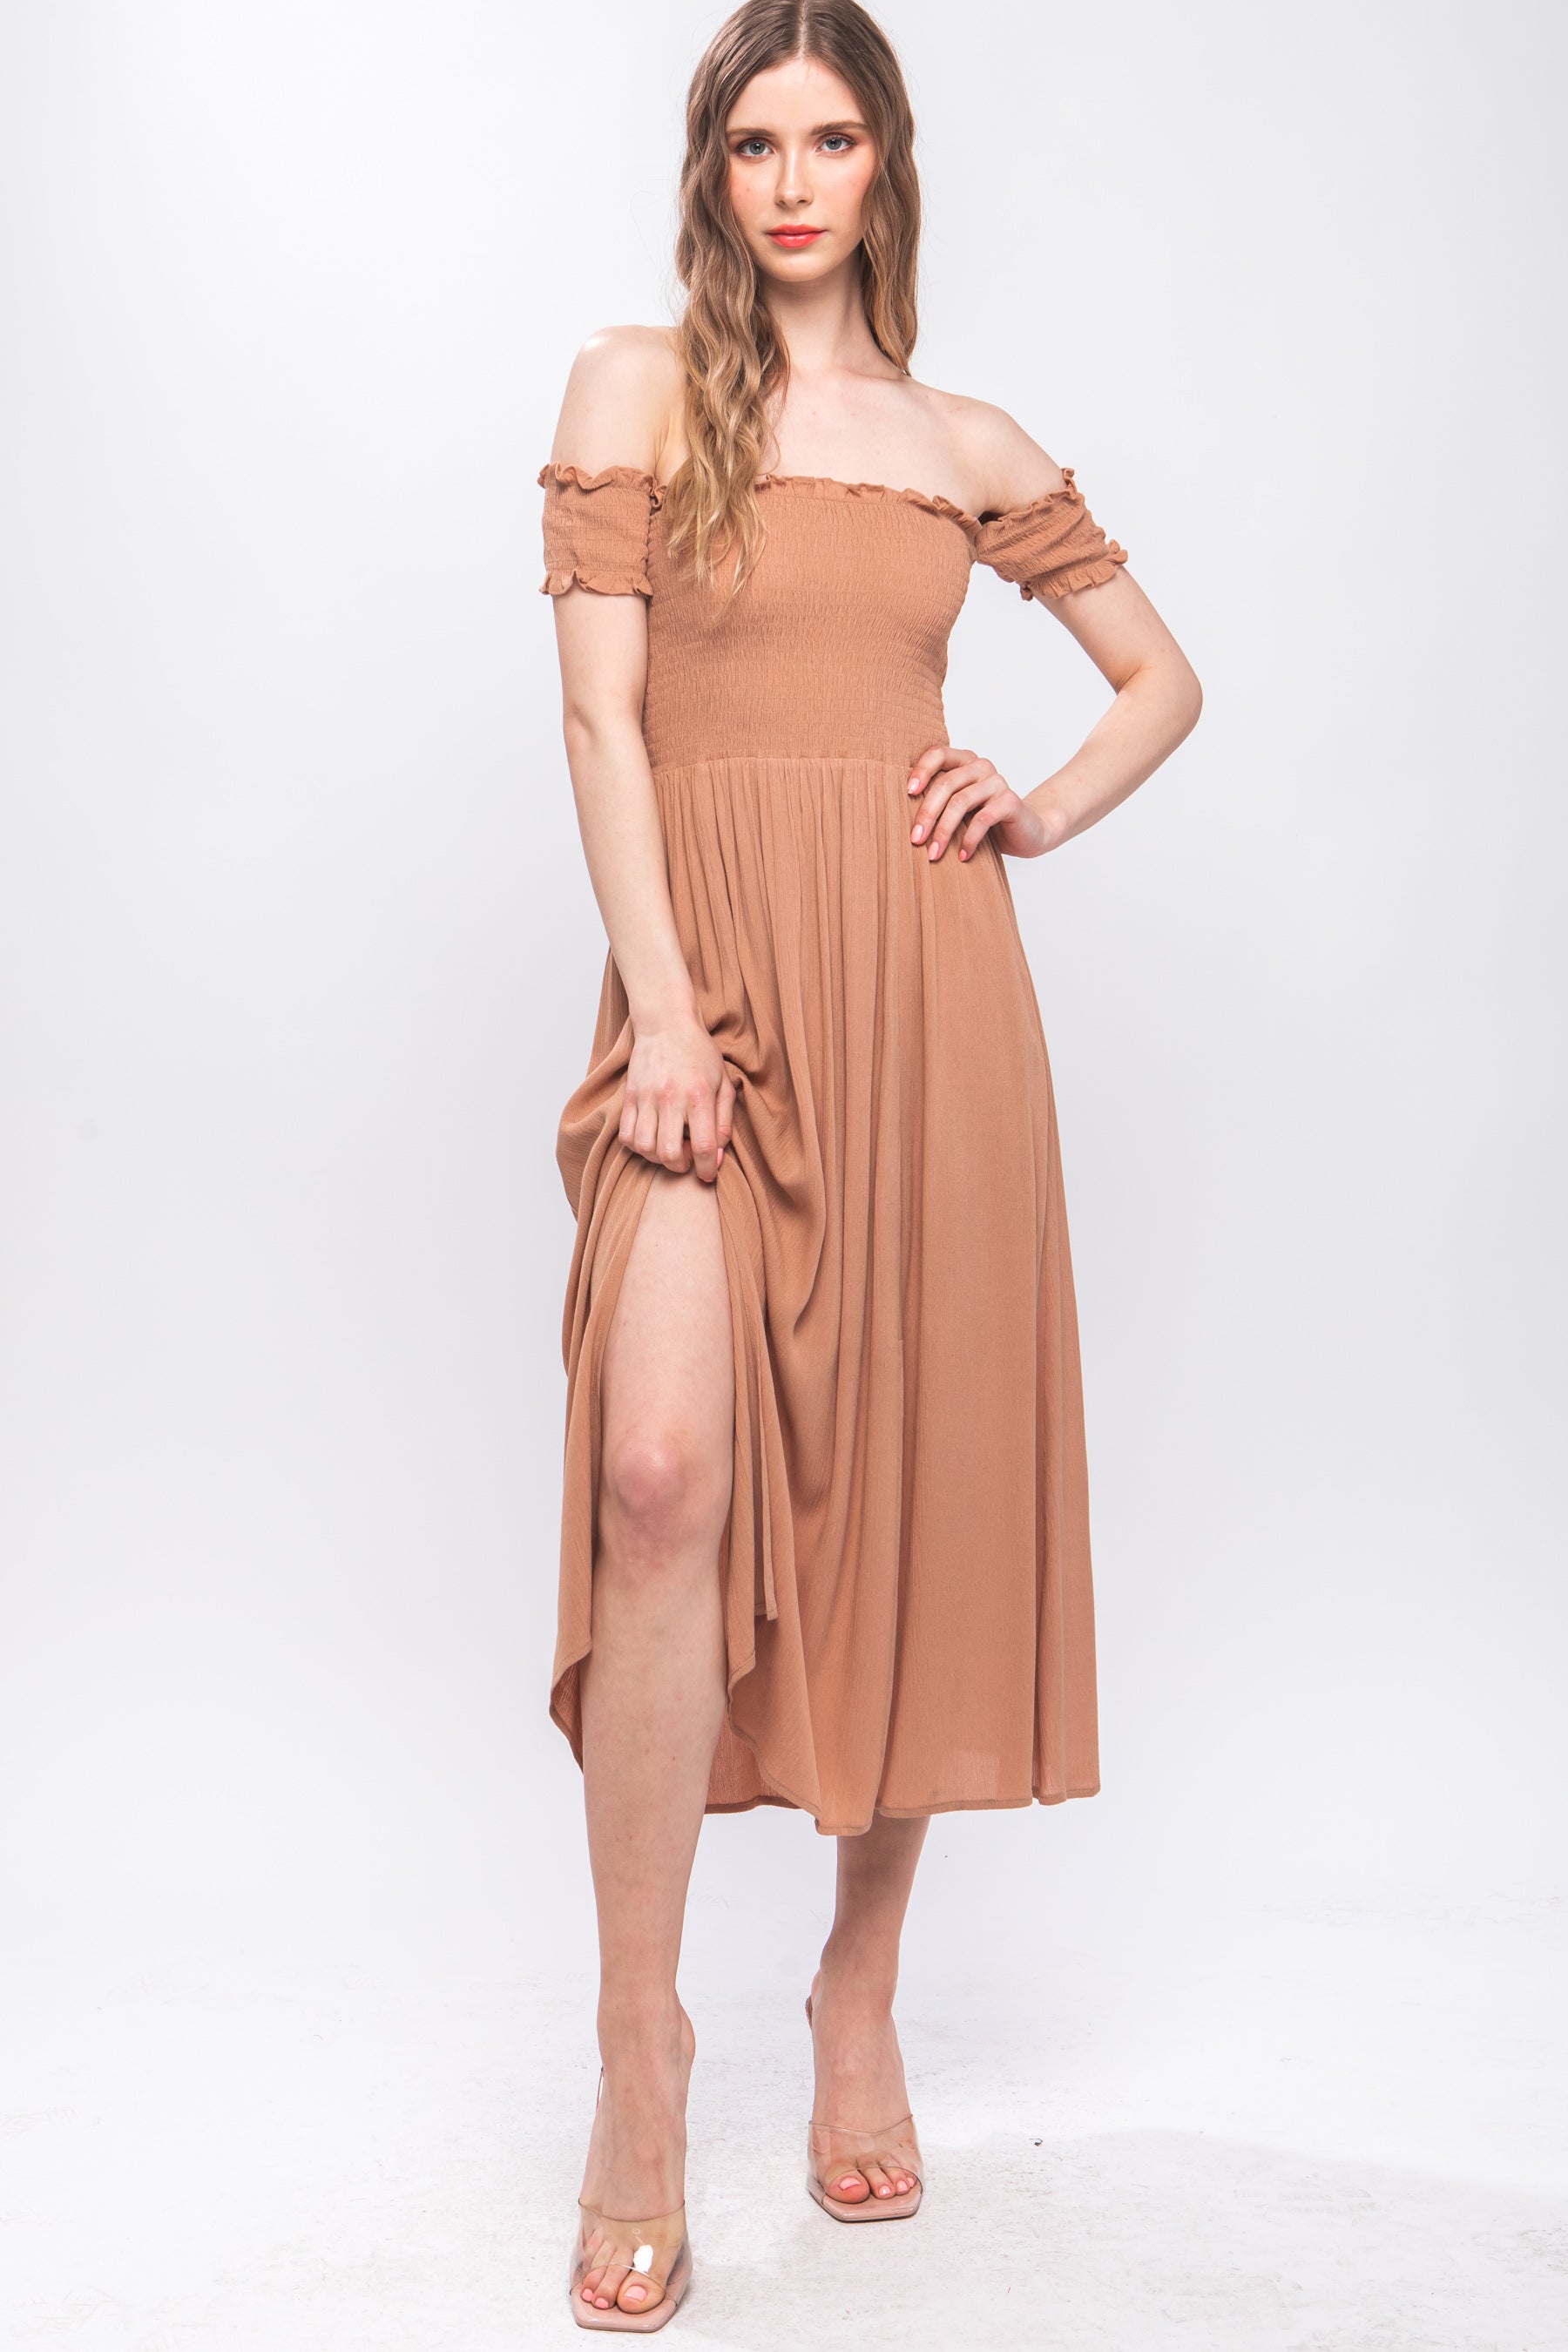 Flowy Off The Shoulder Dress Naughty Smile Fashion